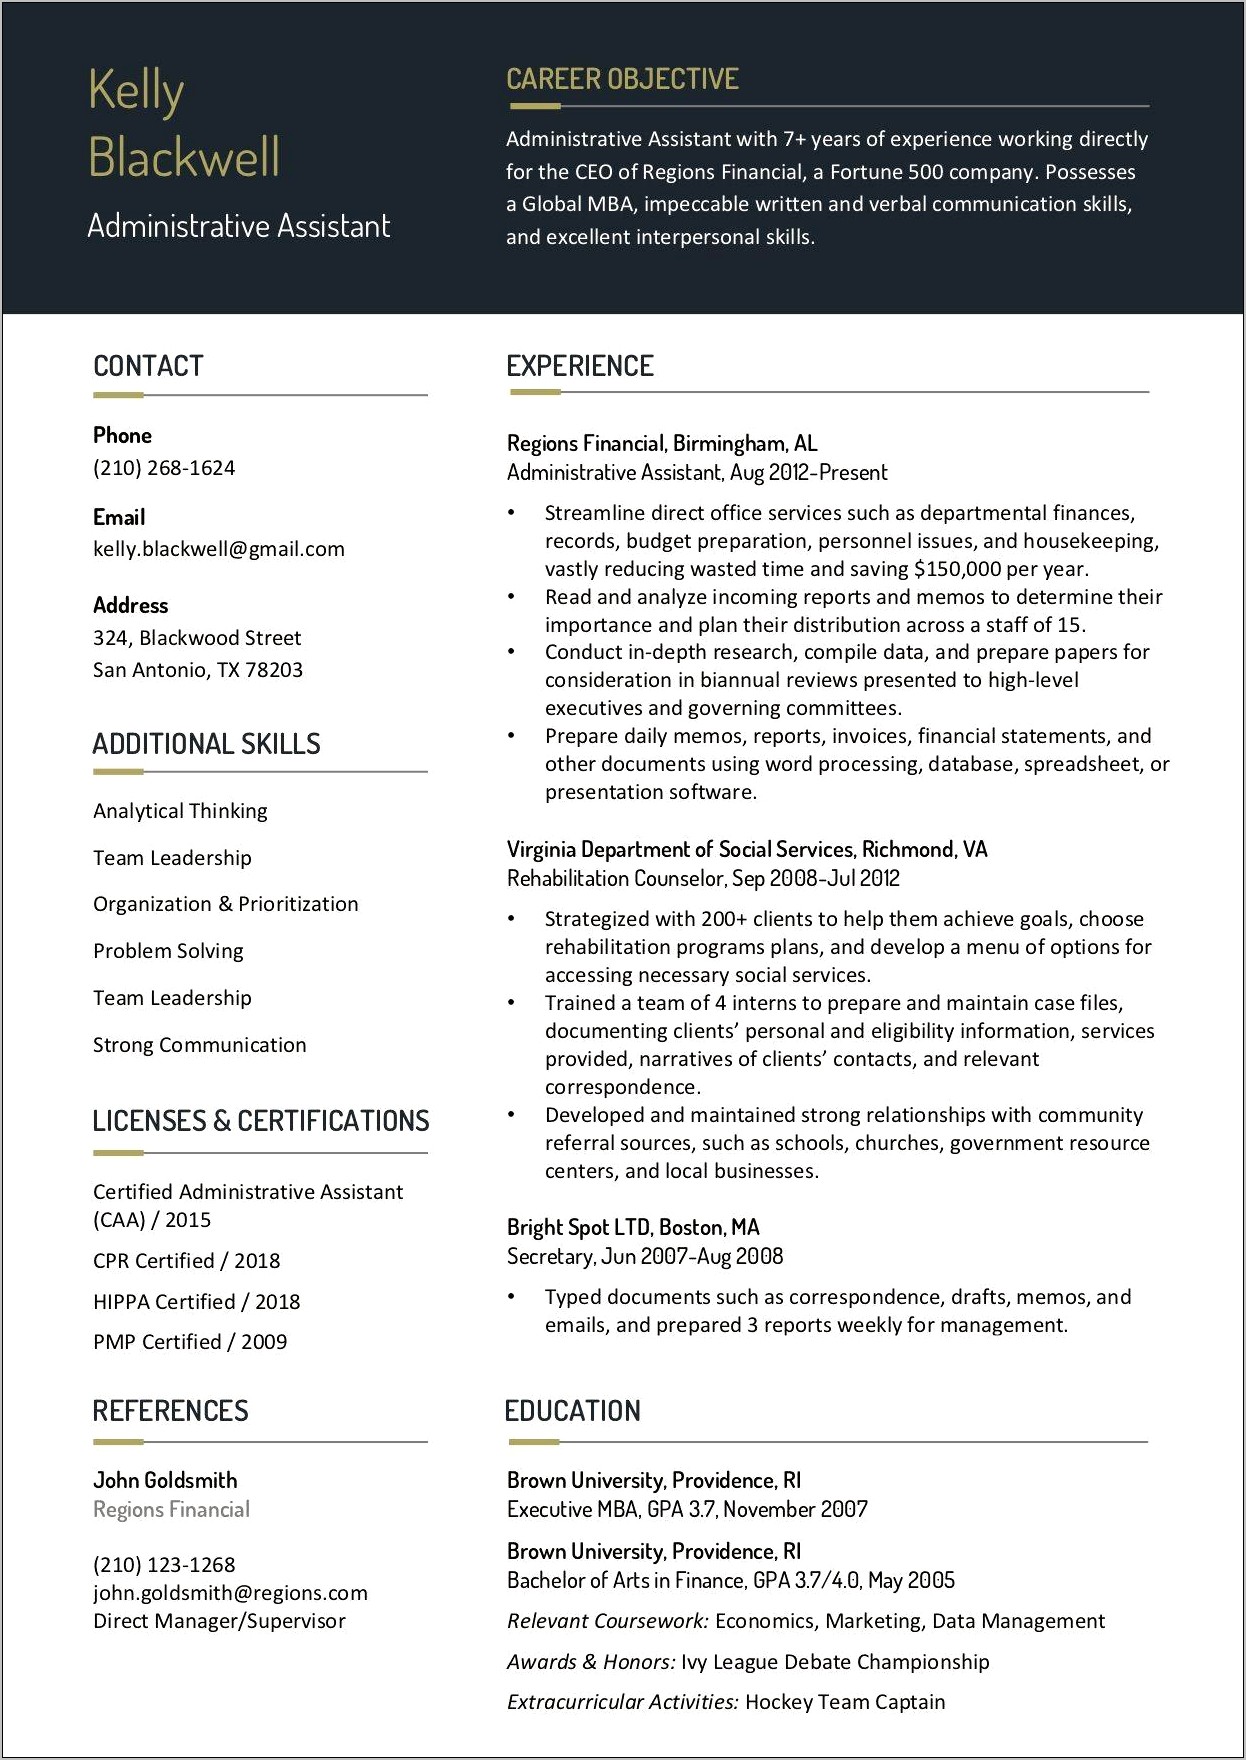 Interpersonal Skills To Mention In Resume